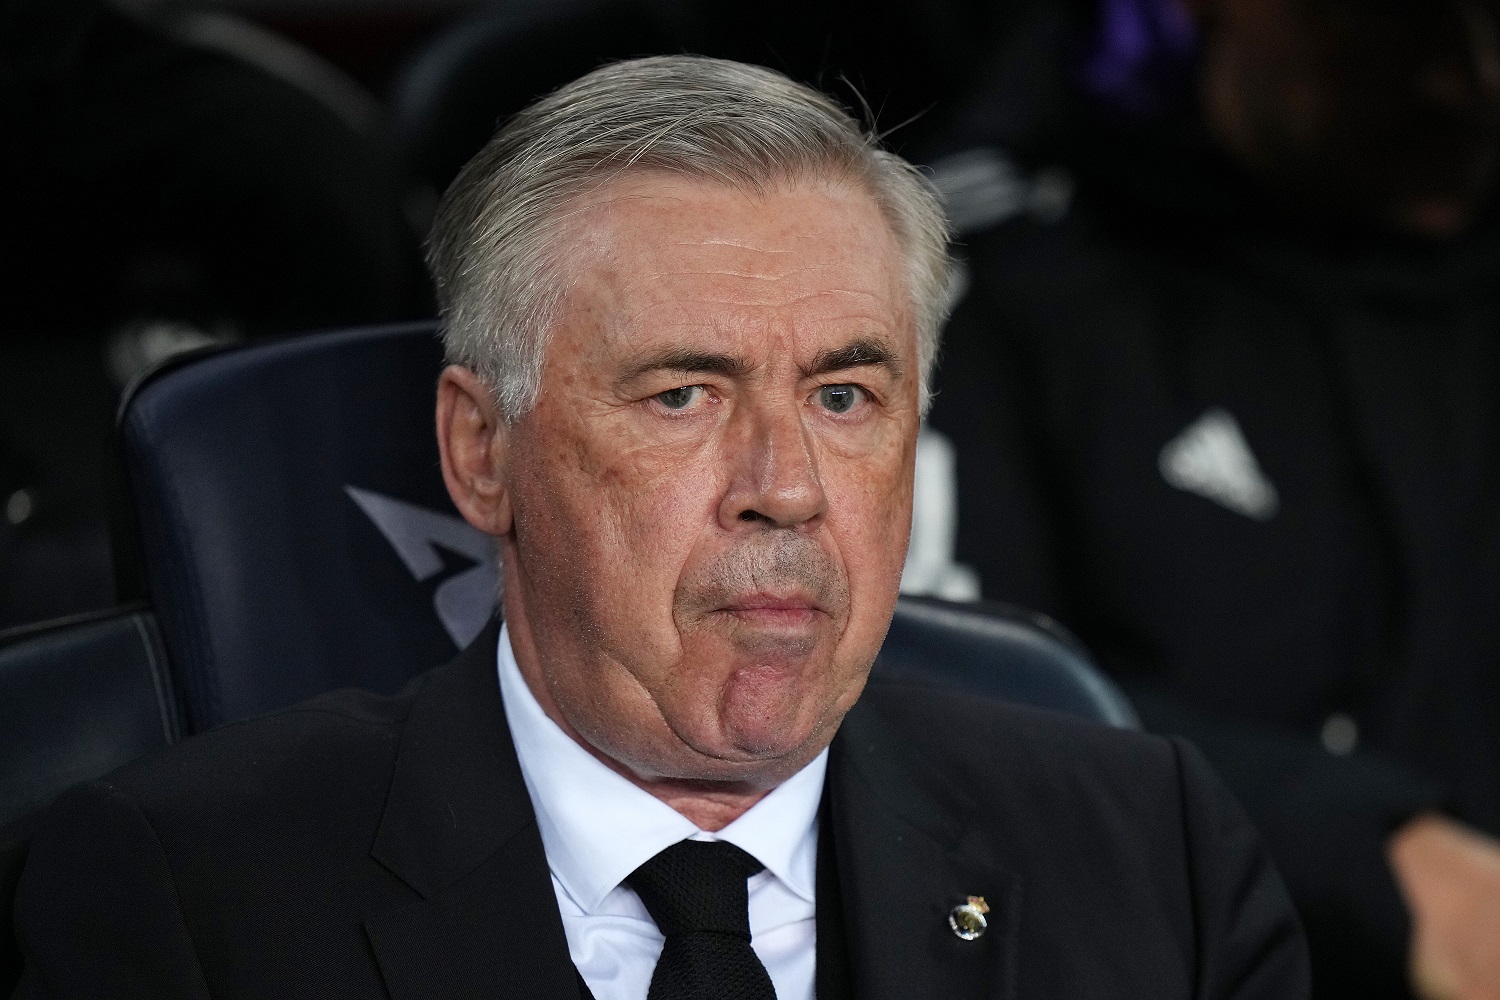 “We have to be prepared” – Carlo Ancelotti issues Real Madrid rallying call after Real Sociedad defeat